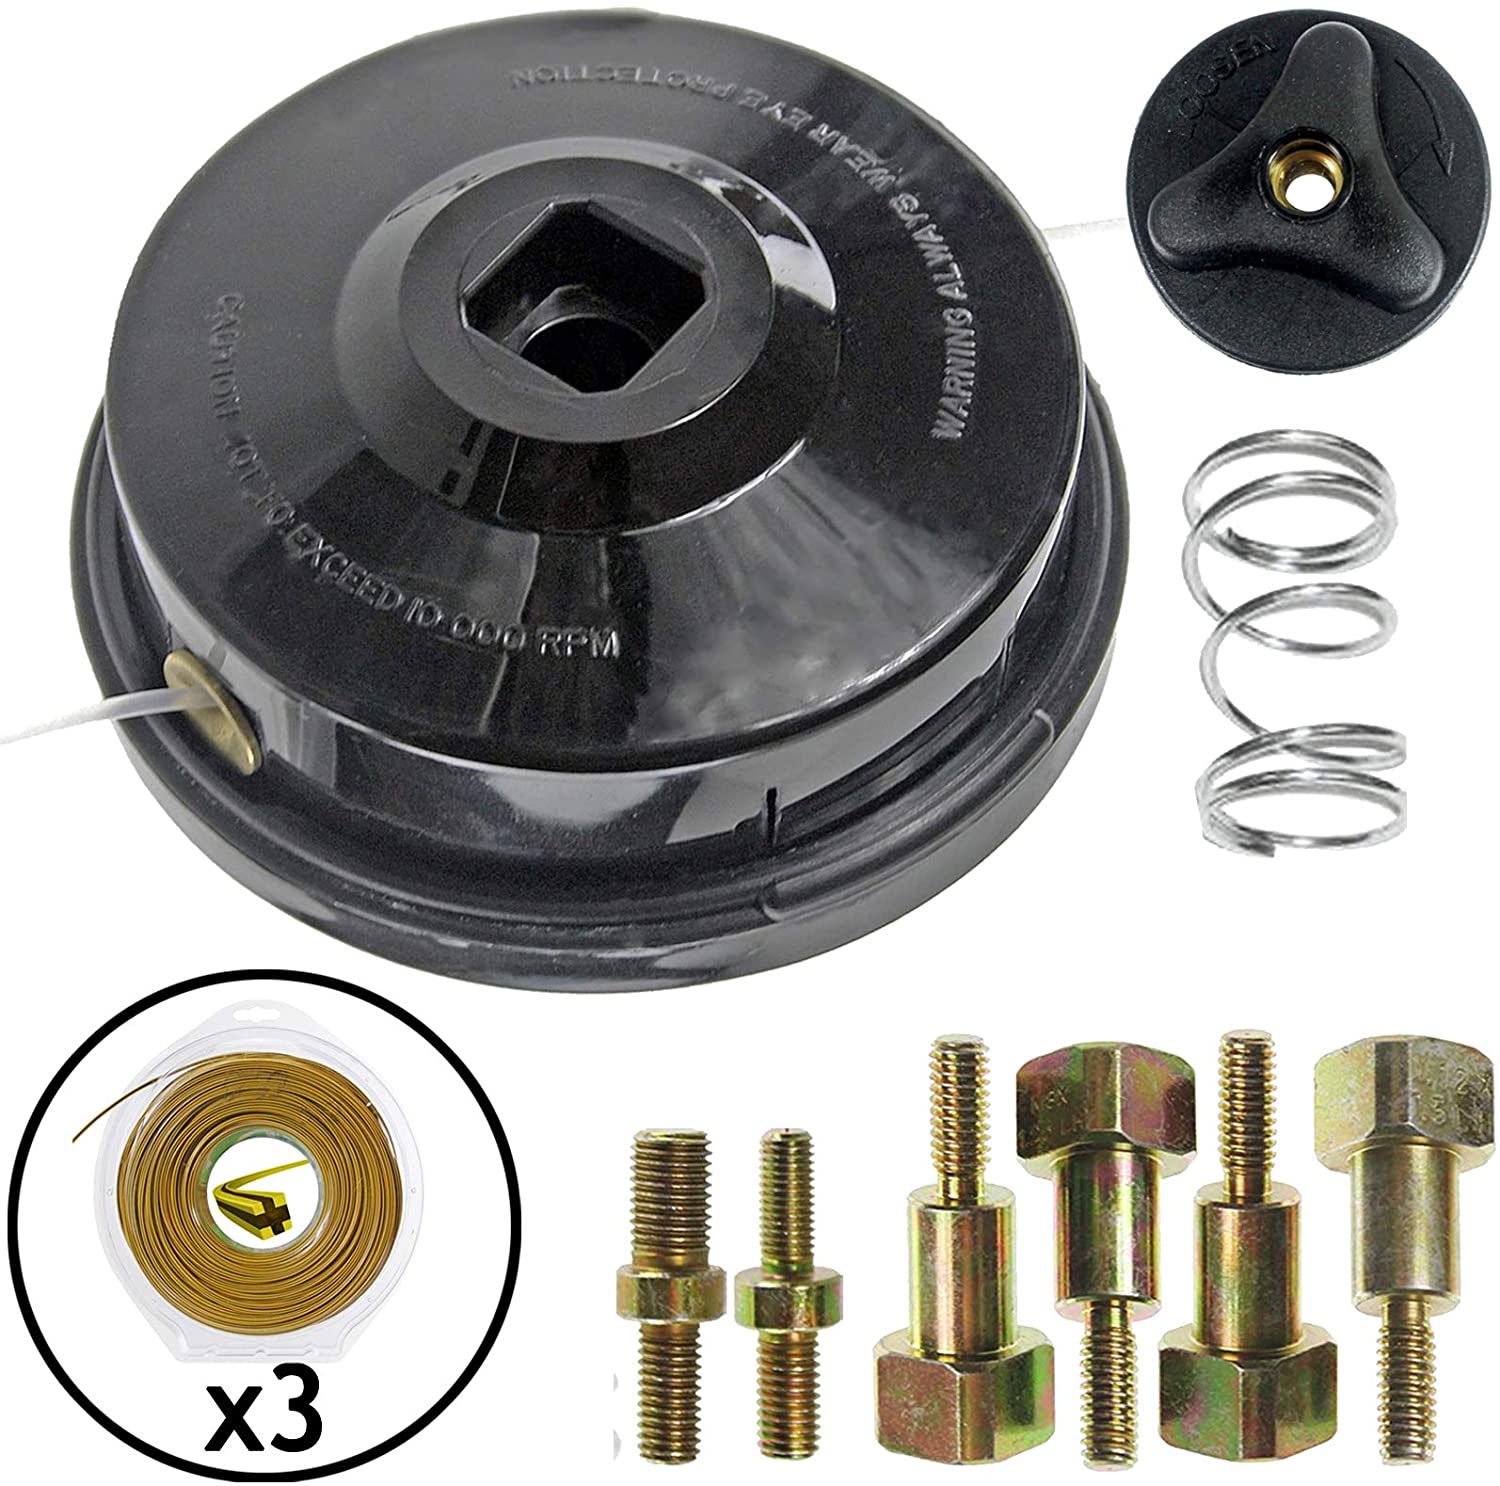 UNIVERSAL Dual Line Manual Feed Head with Bolts +3 x 80m Dual Core Refill for Strimmer/Trimmer/Brushcutter